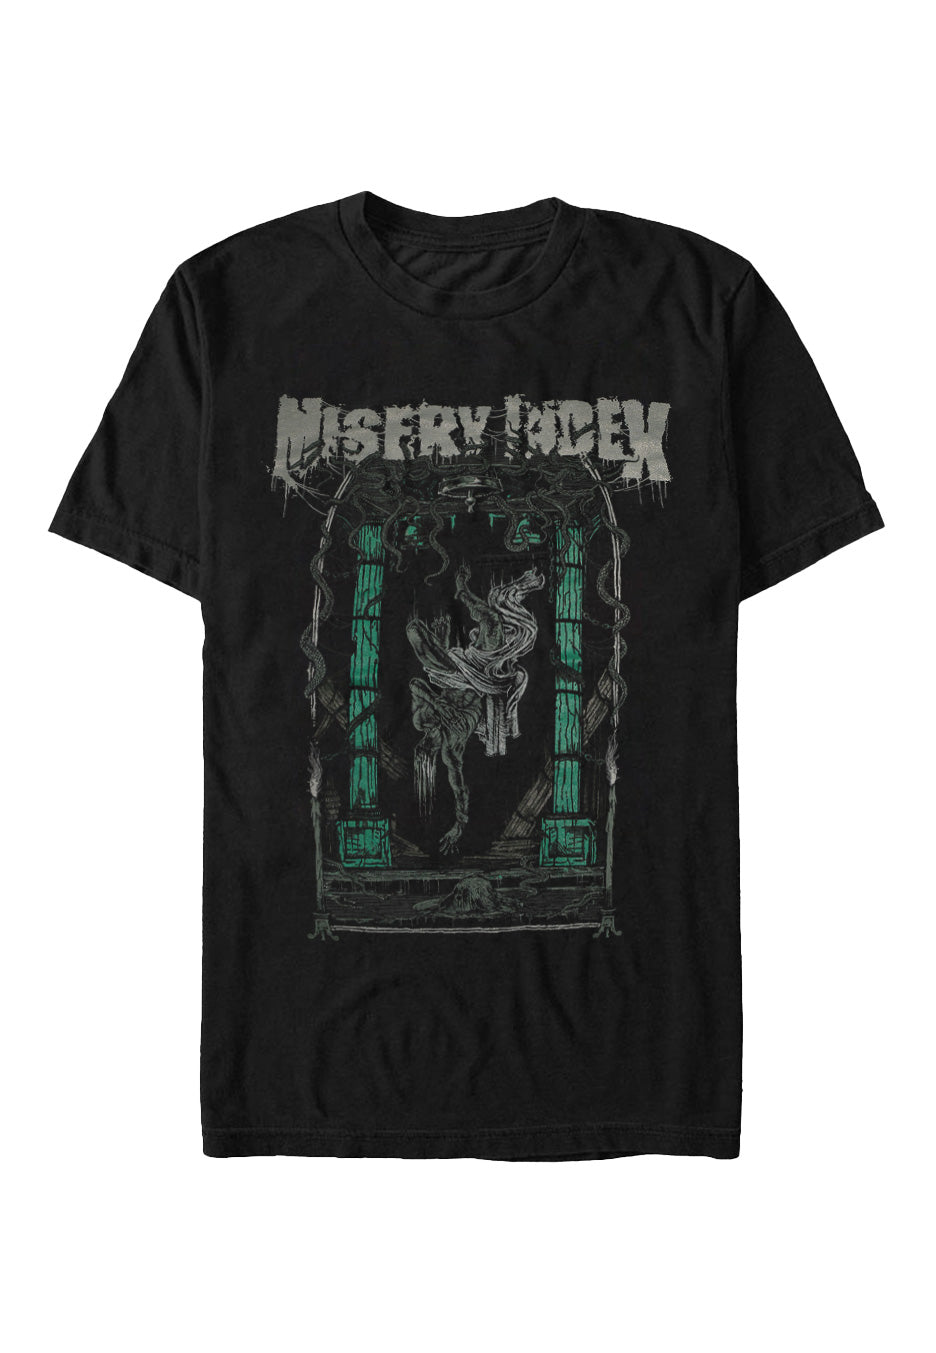 Misery Index - The Calling - T-Shirt